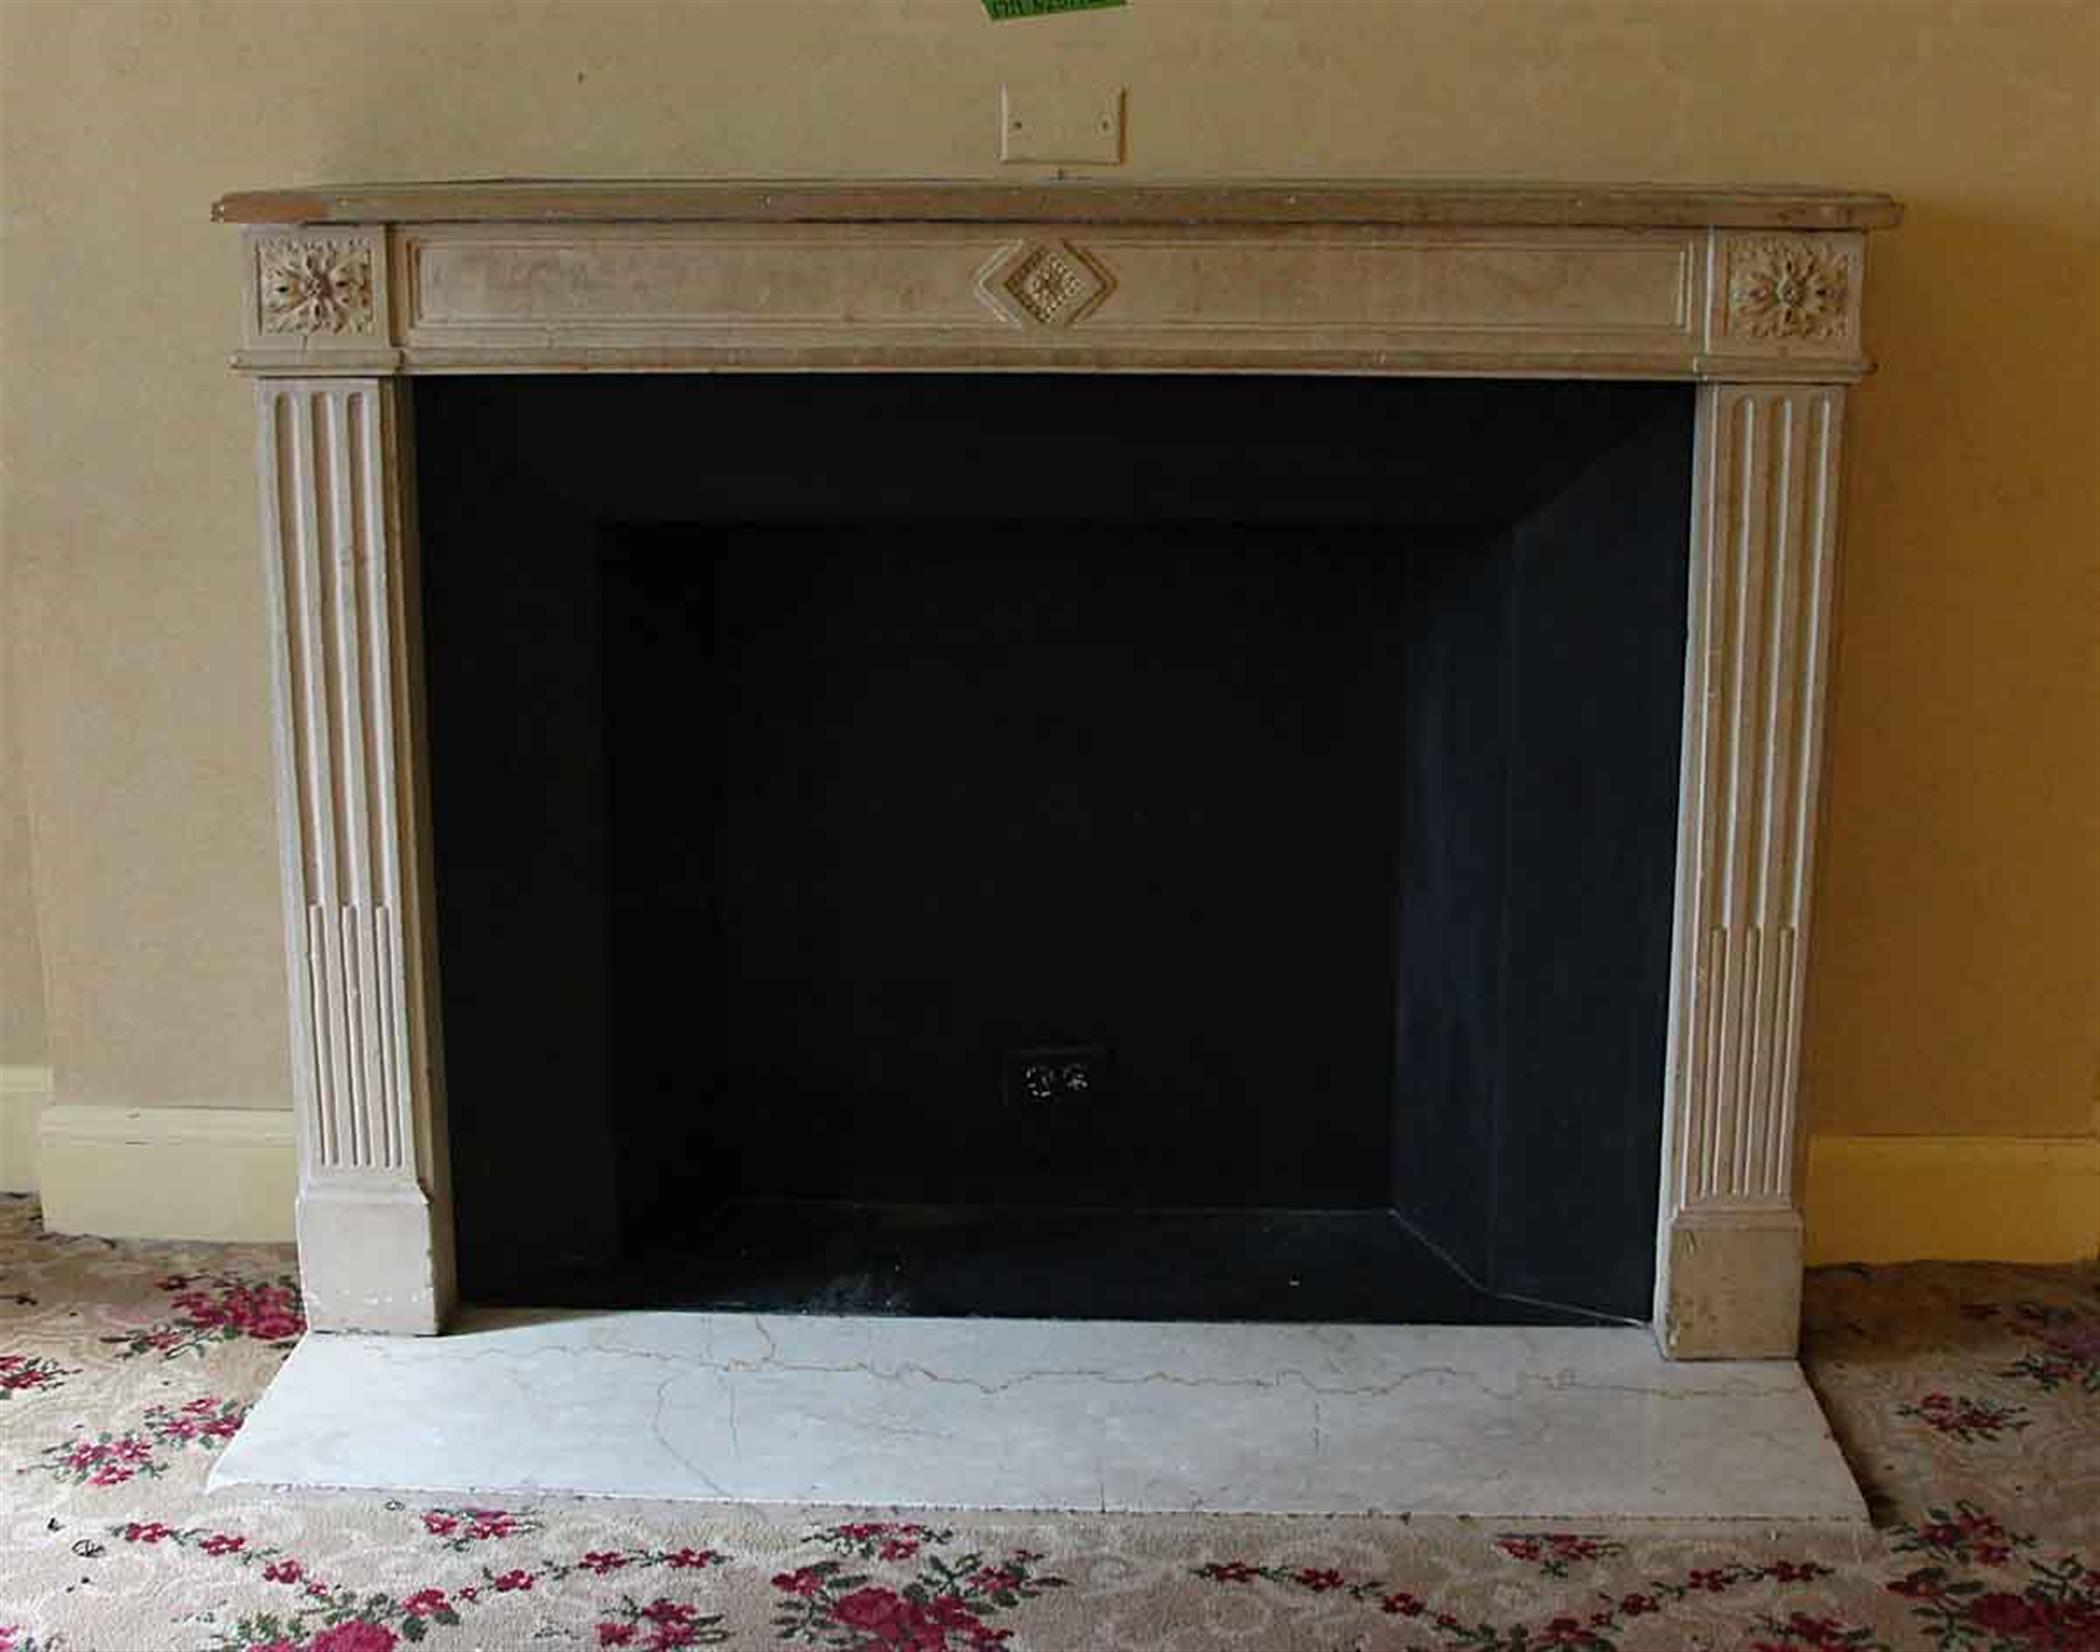 Louis XVI French Regency carved limestone mantel from 1890s France. This mantel was imported from France and installed in the NYC Waldorf Astoria Hotel on Park Avenue in New York City in 1931. There is minor chipping which appears somewhat evenly on